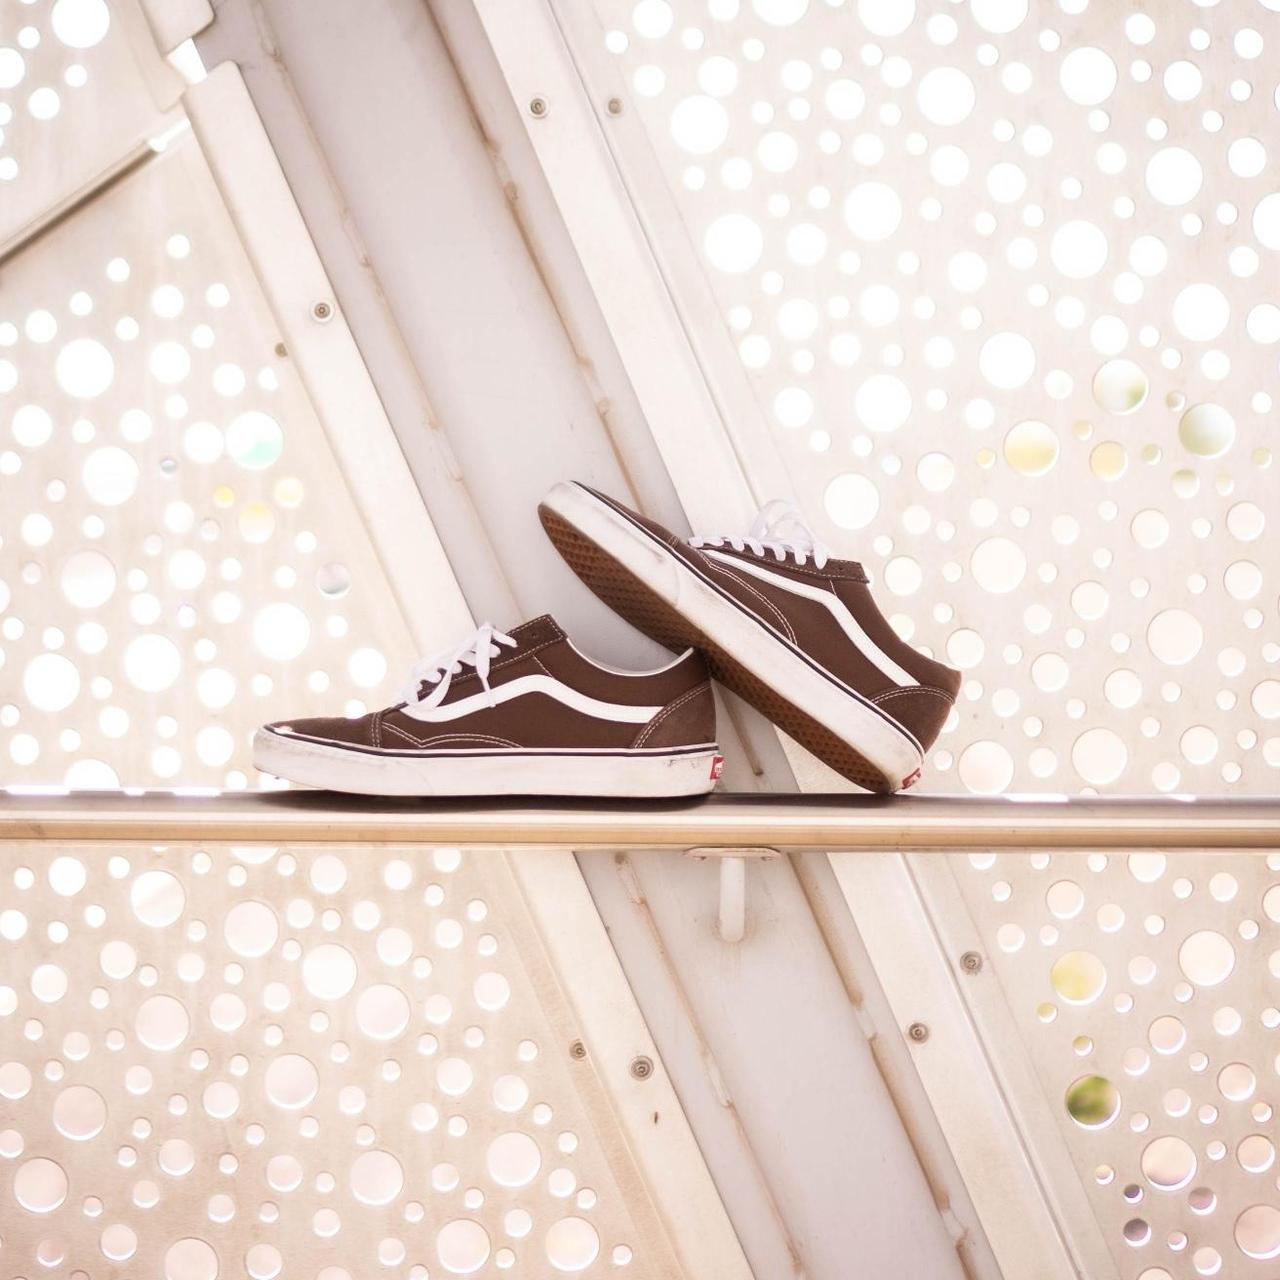 Vans Men's Brown and White Trainers (2)